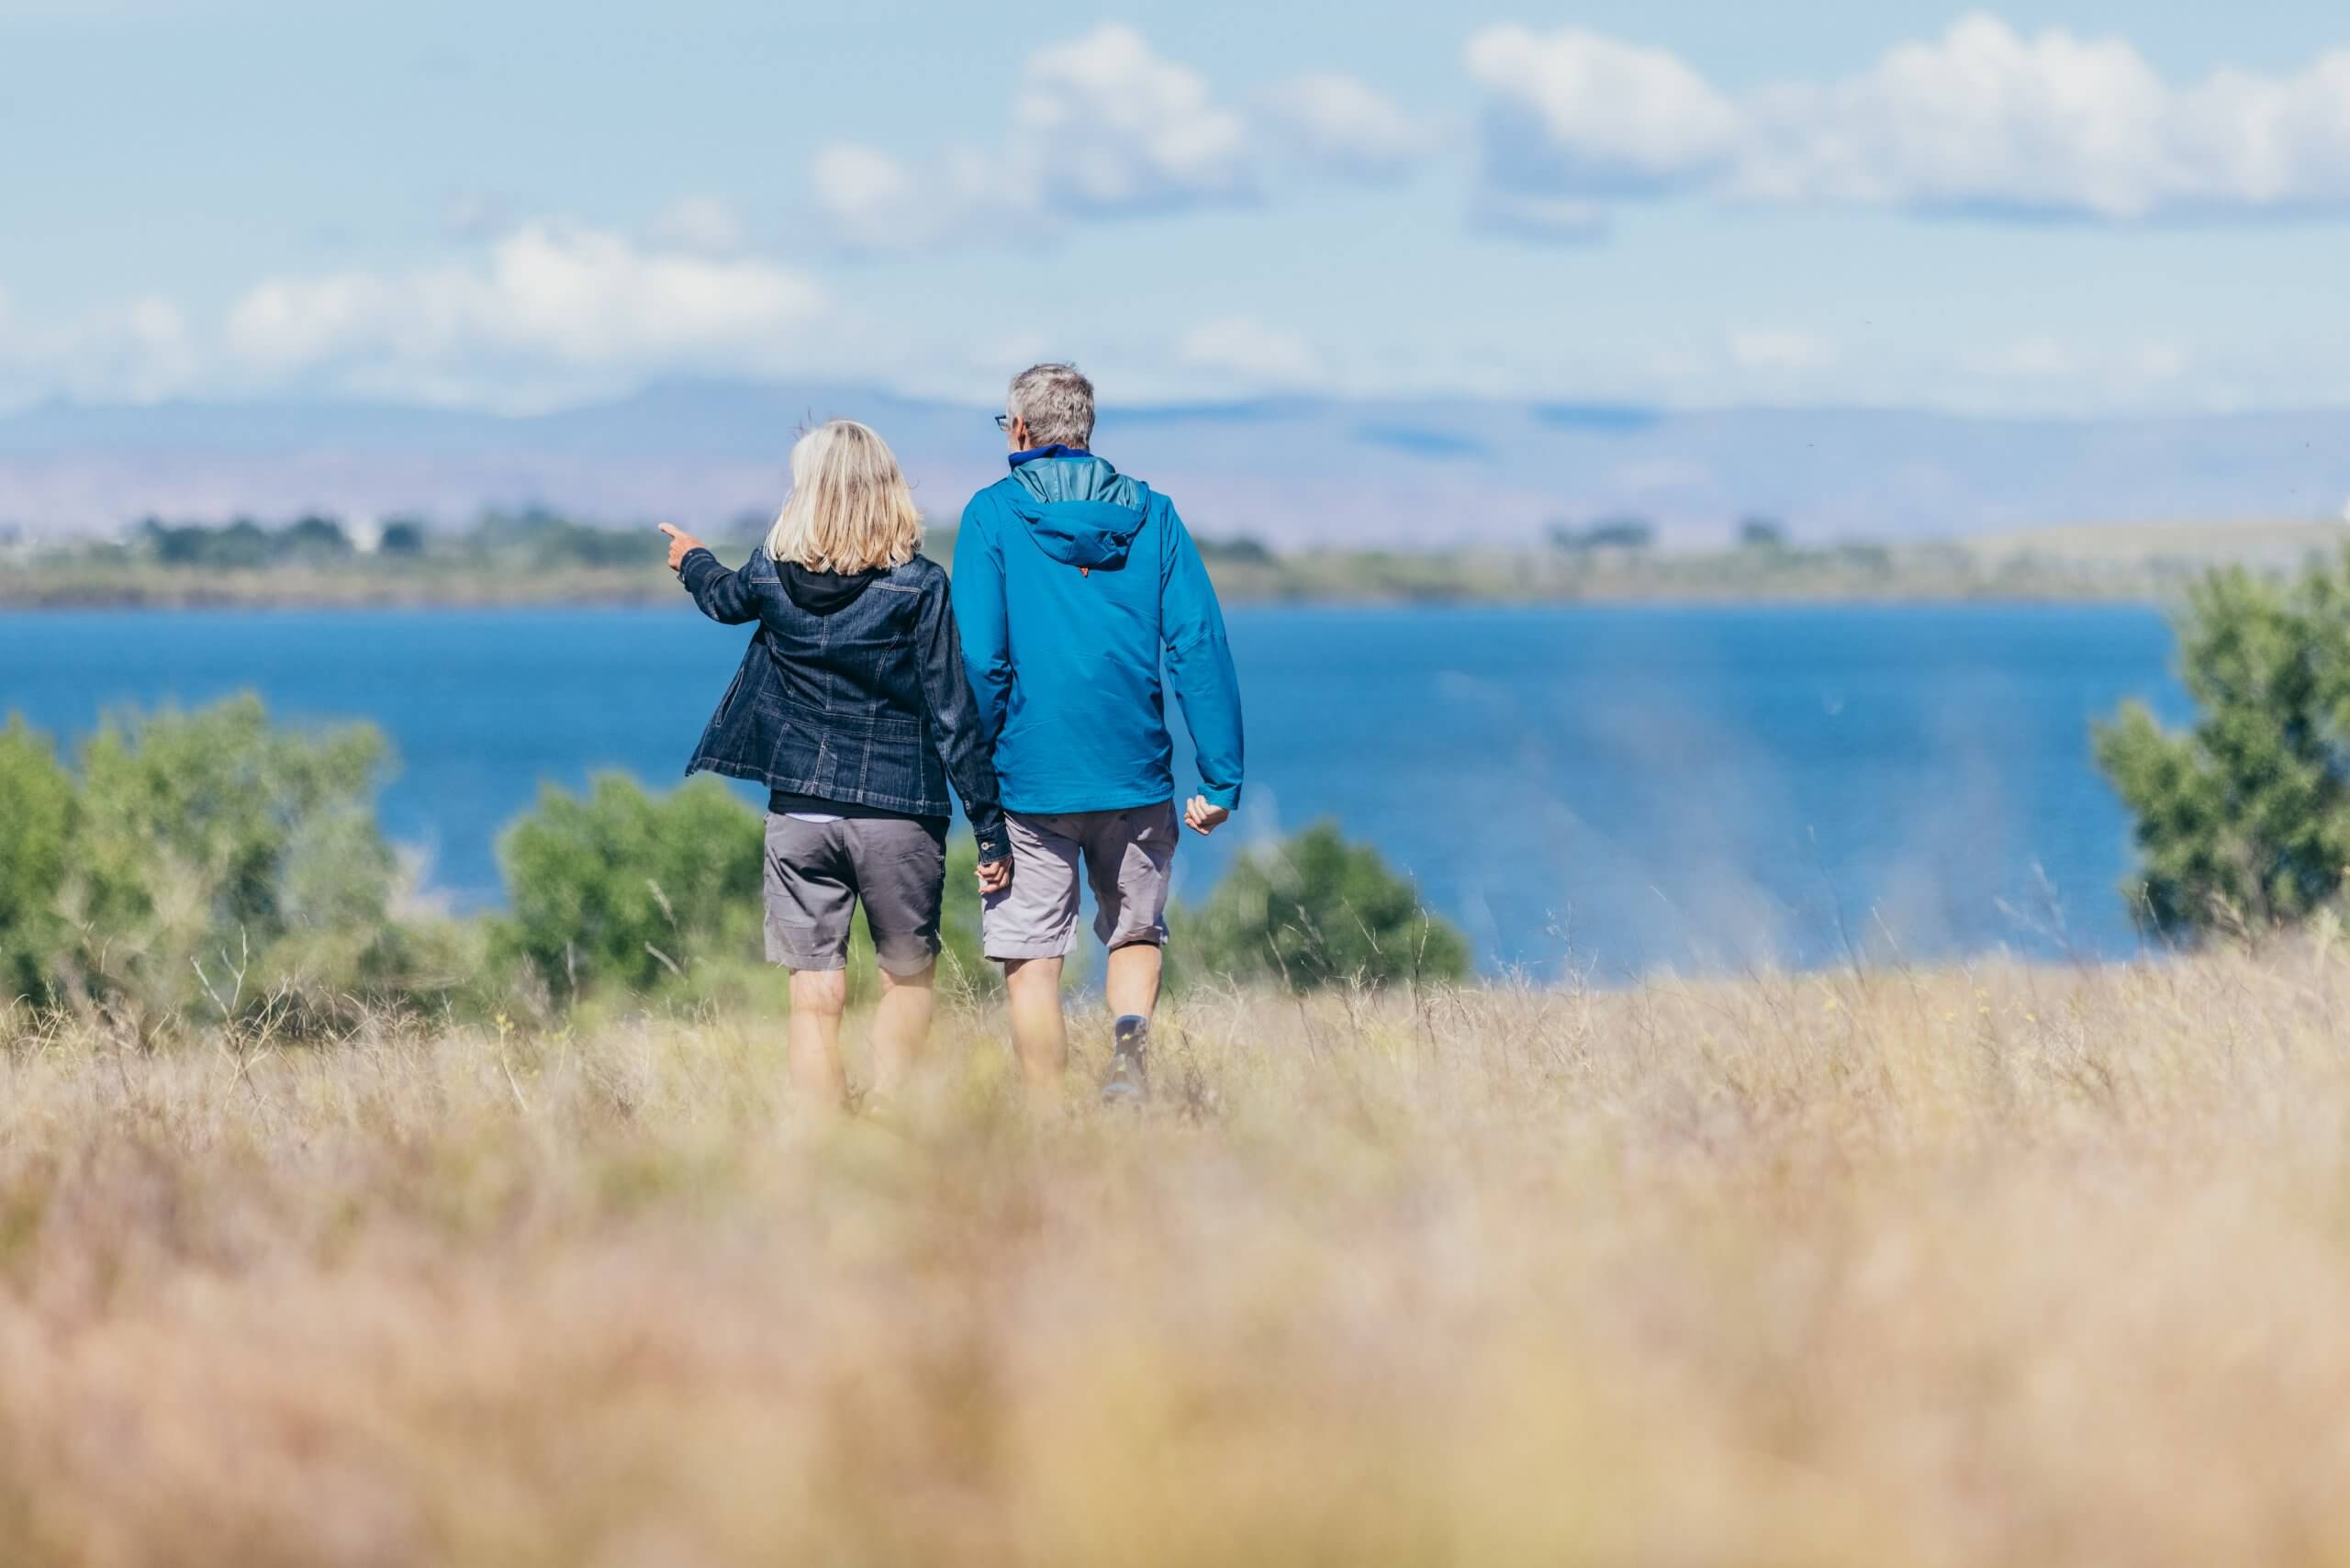 back view of two people at a wildlife refuge walking towards a lake